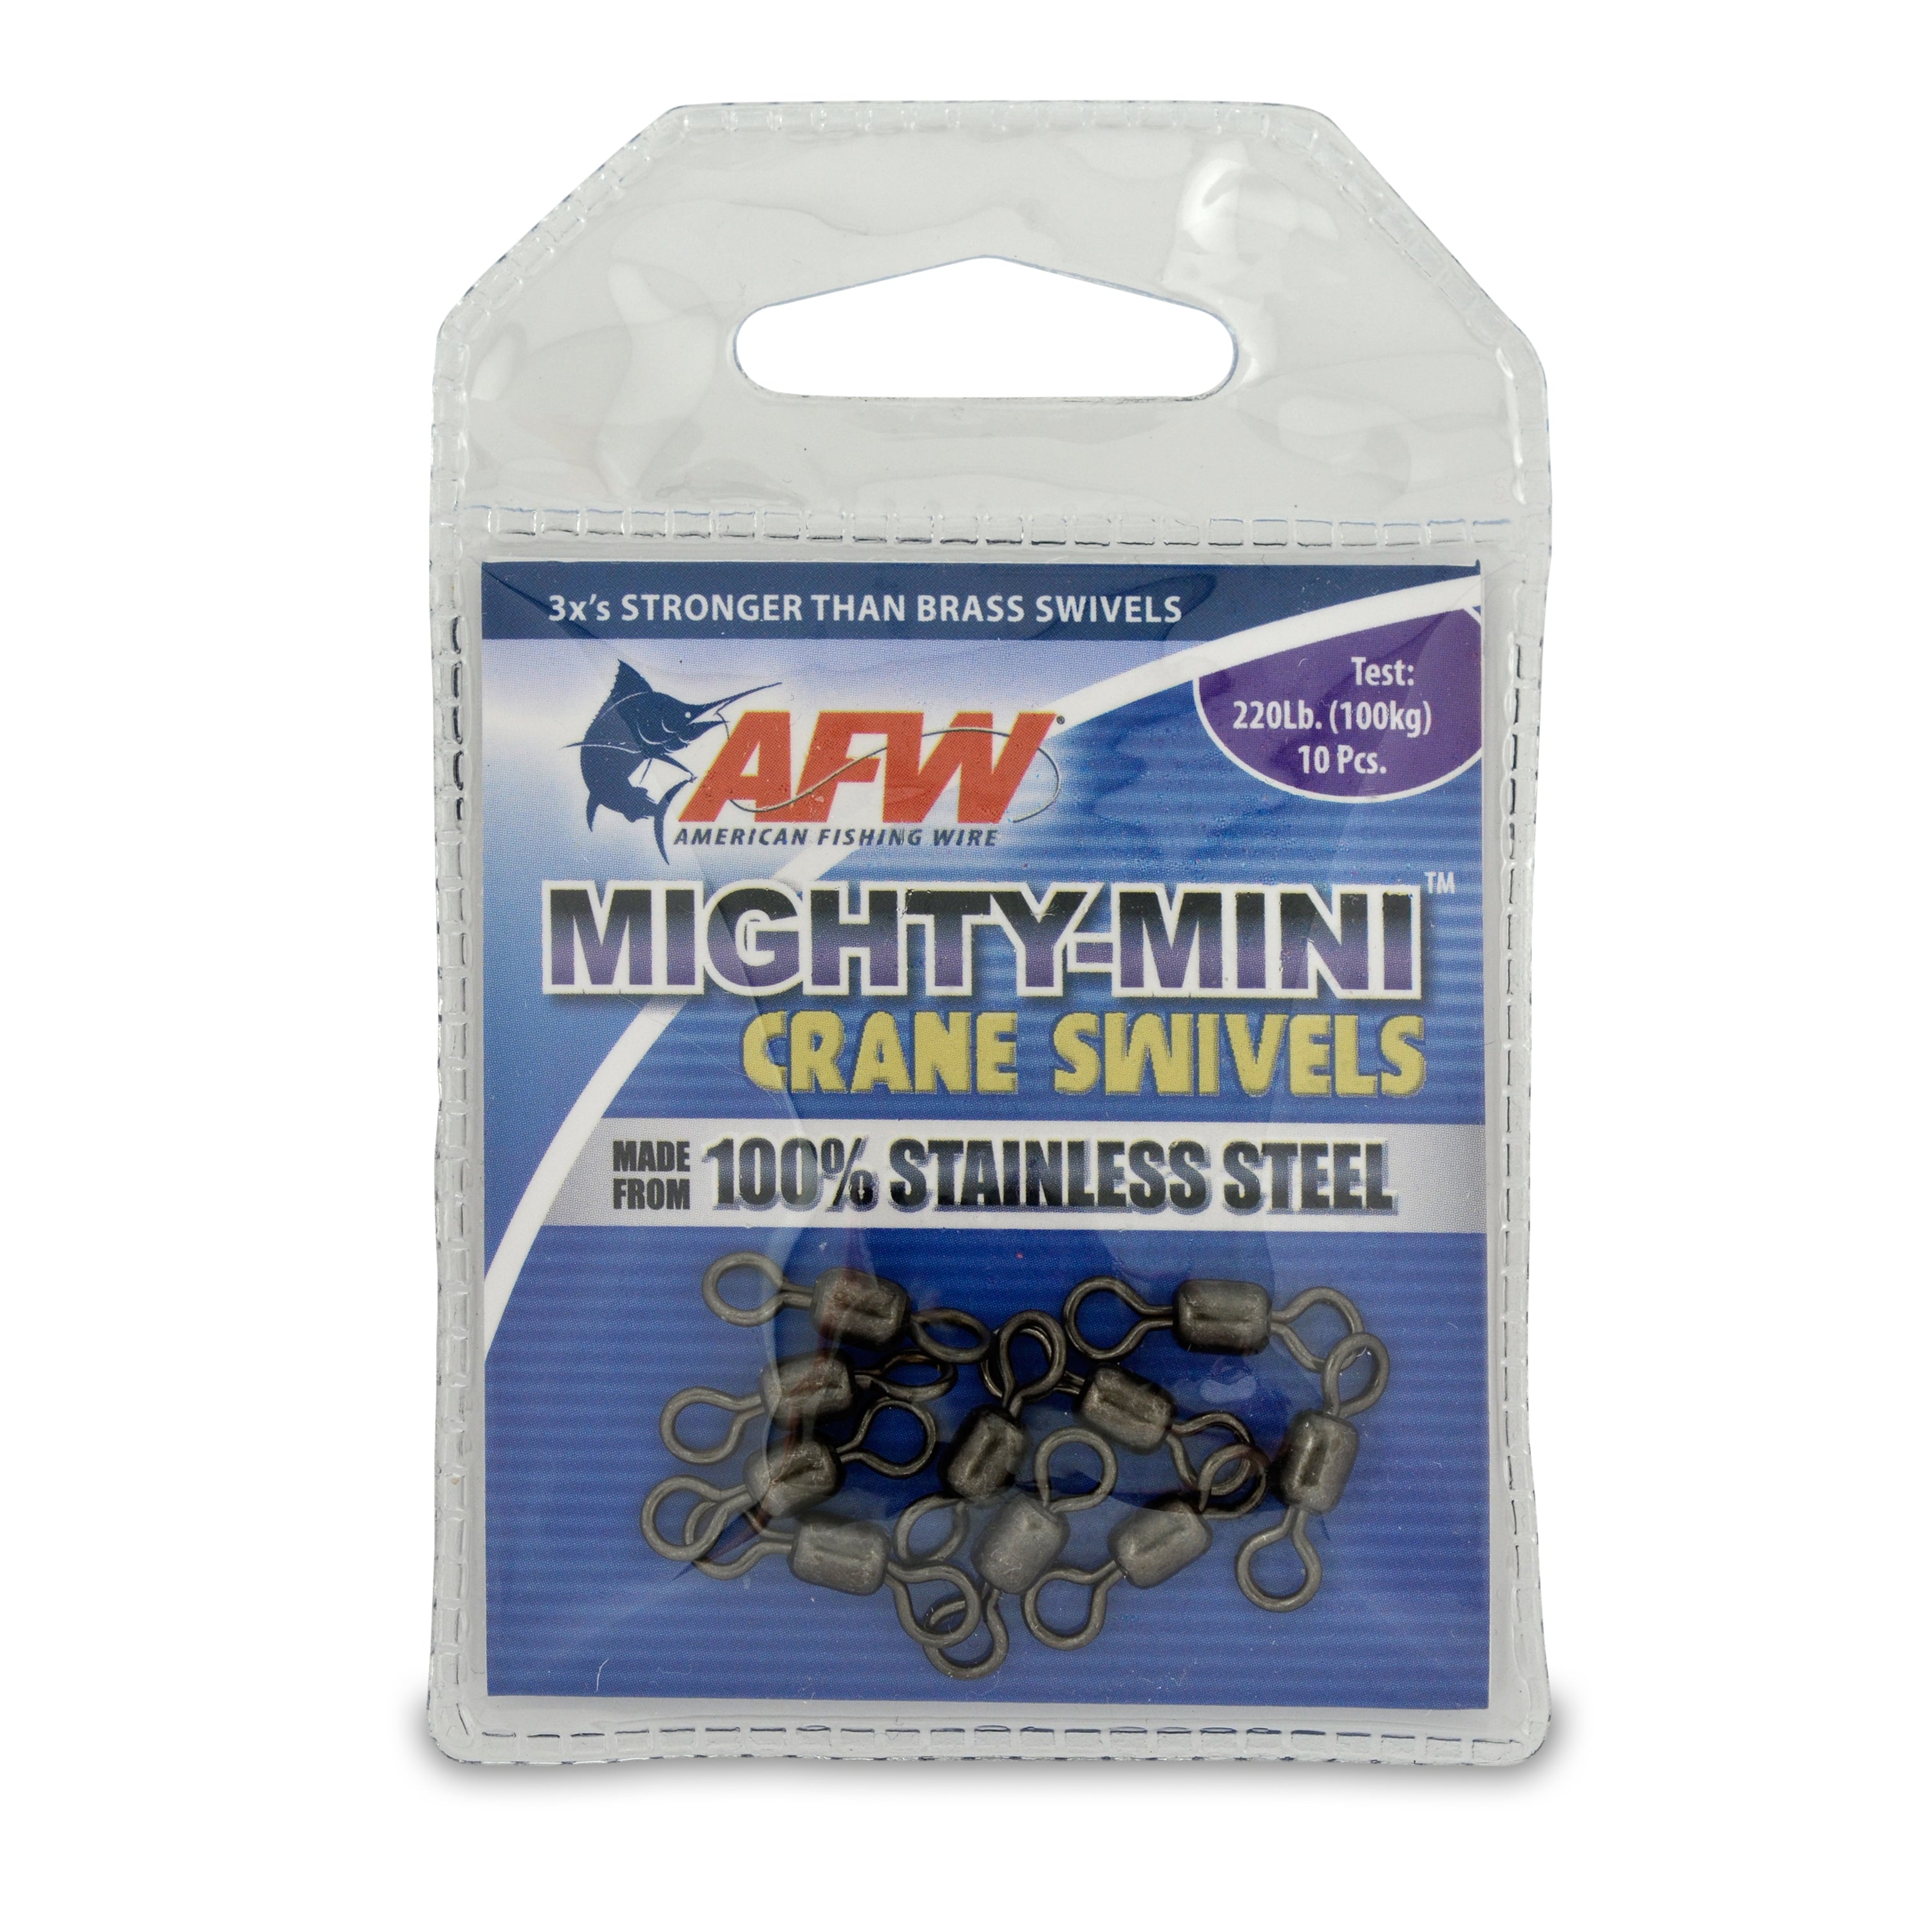 American Fishing Wire Mighty-Mini Stainless Steel Crane Swivels